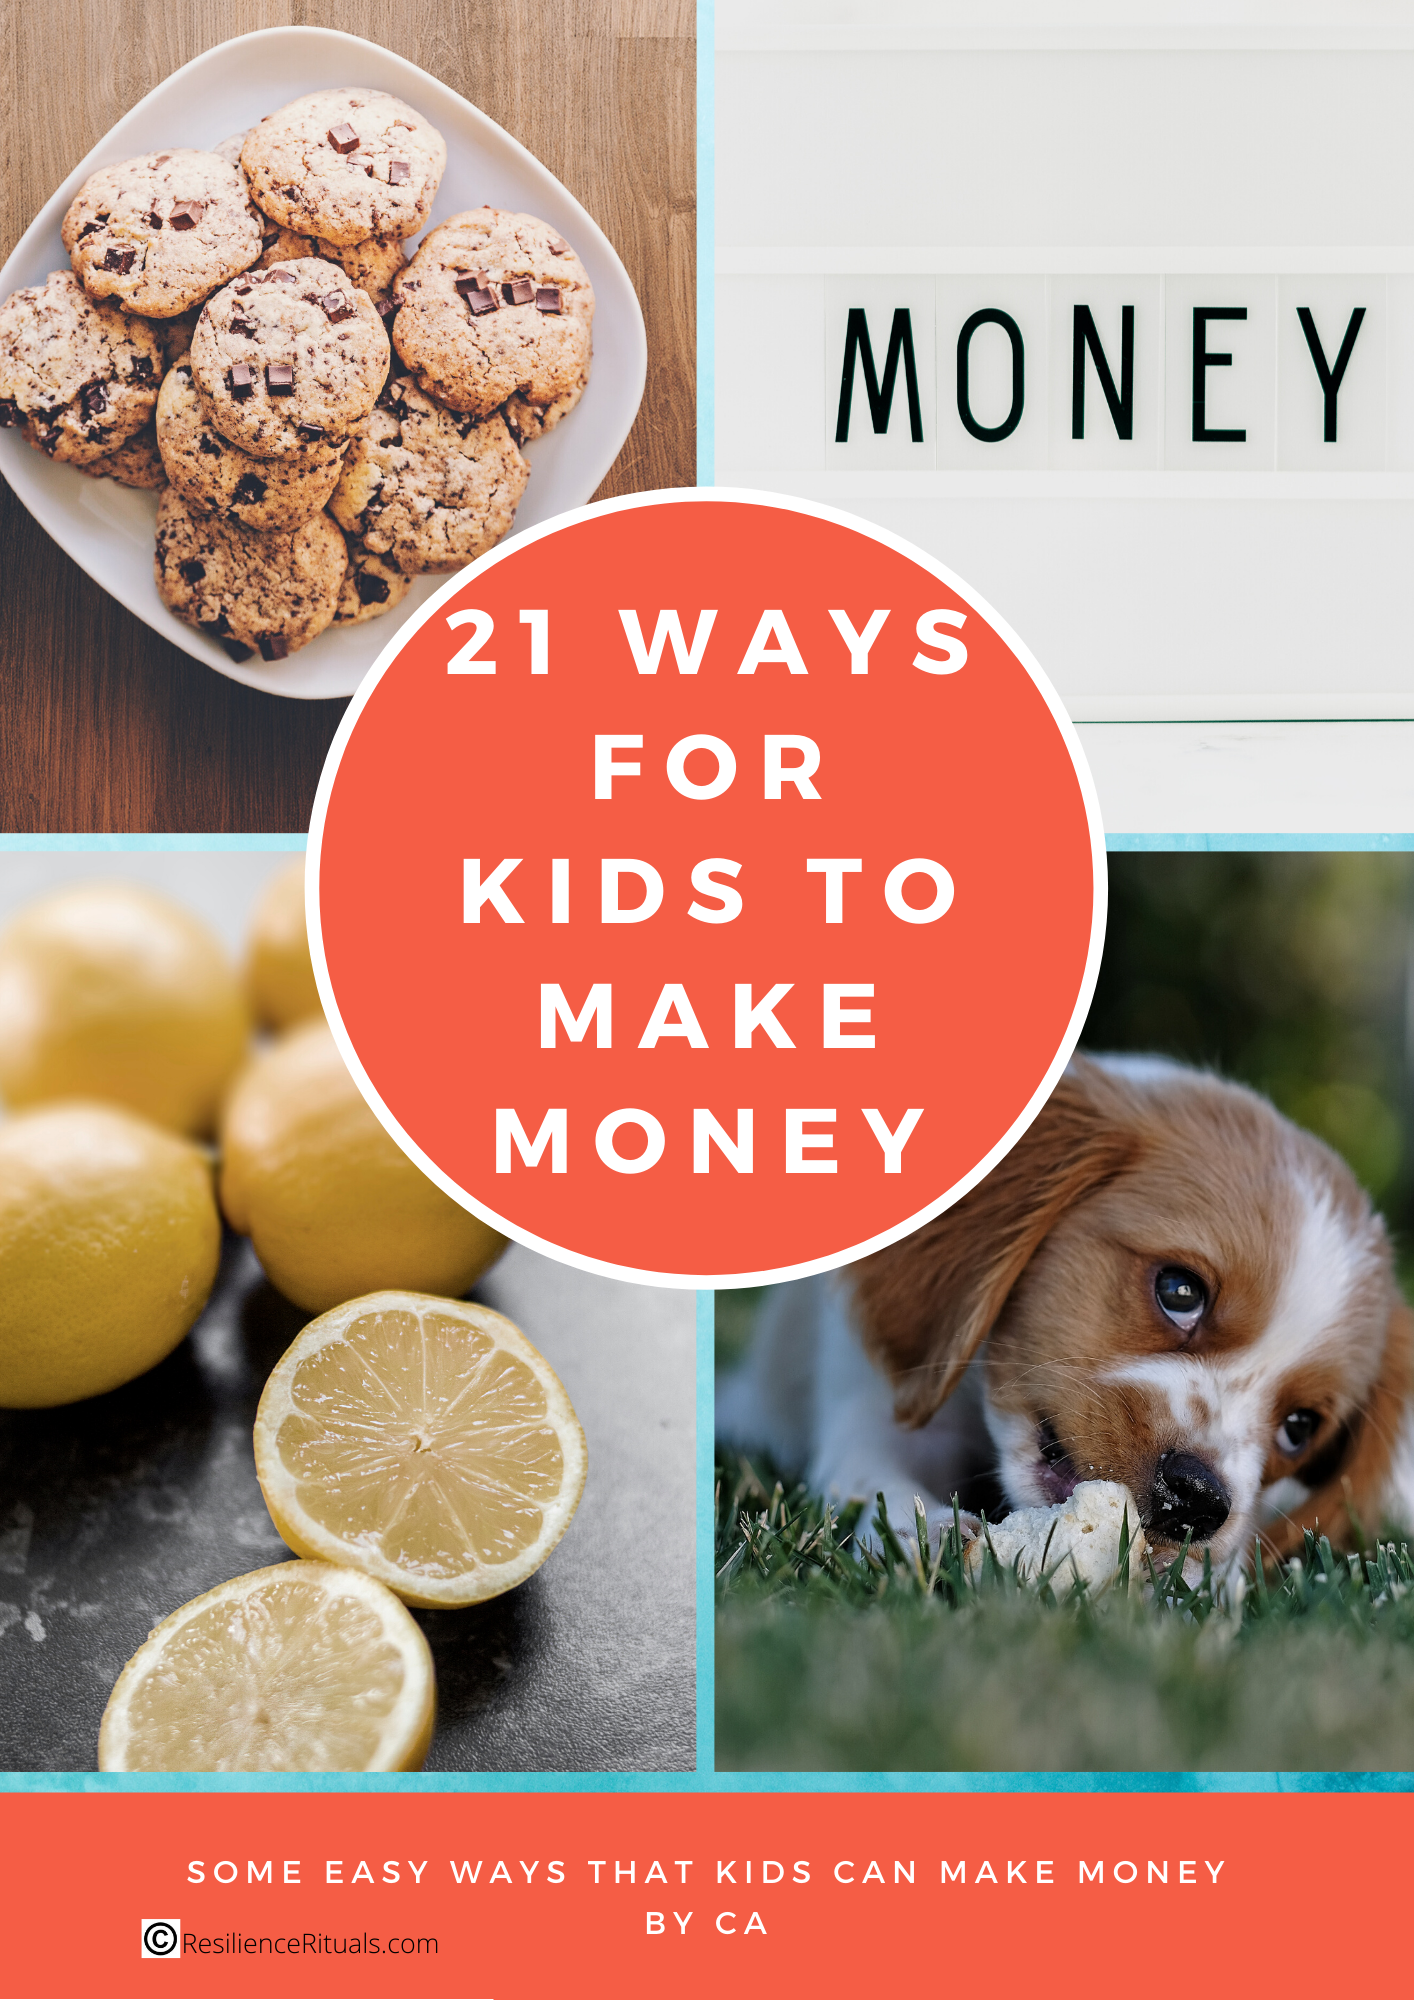 21 Ways For Kids To Make Money - Resilience Rituals